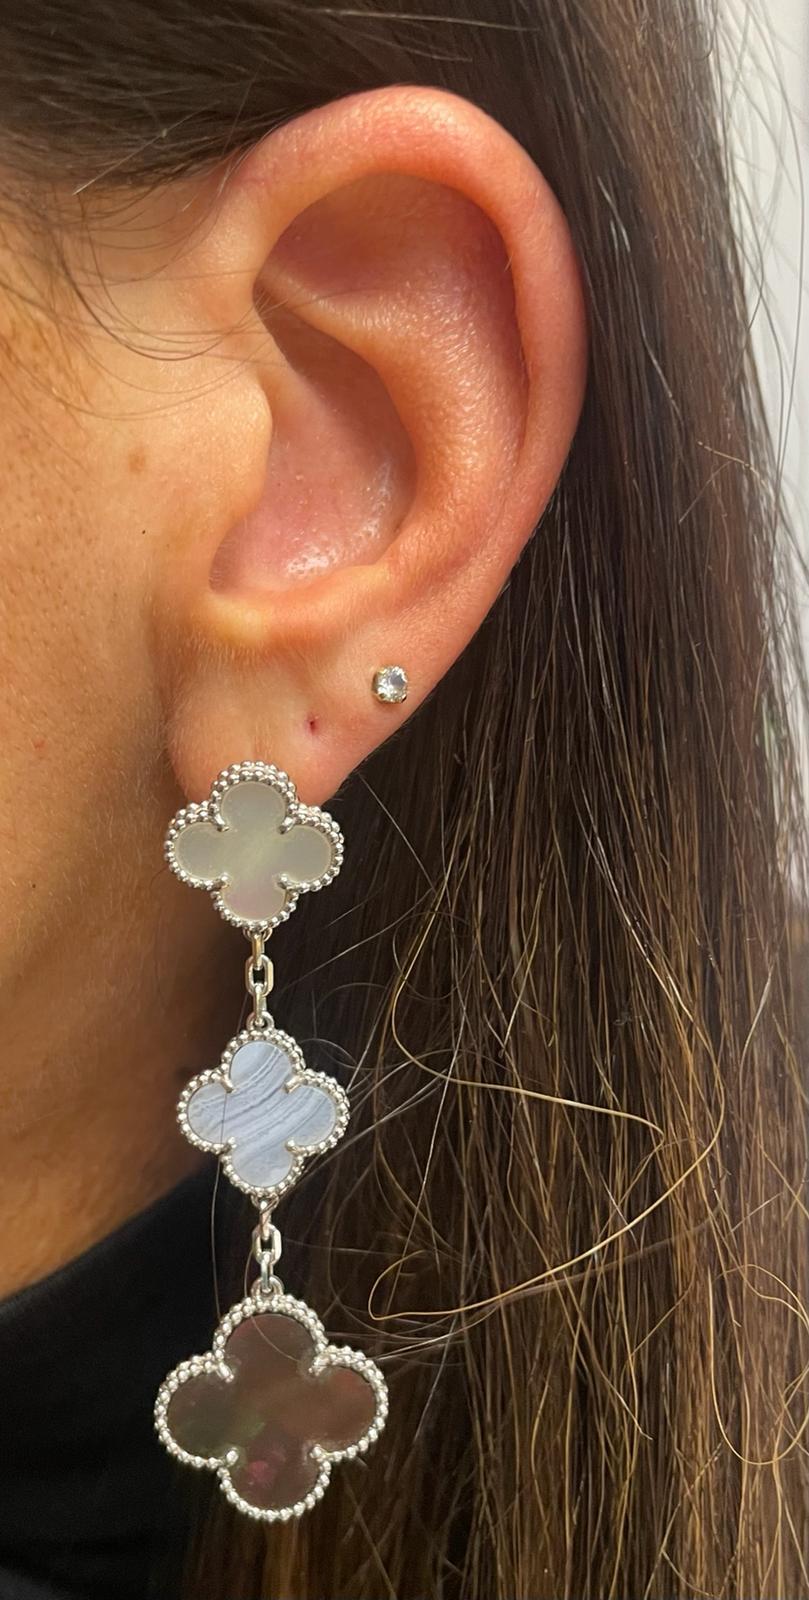 Van Cleef & Arpels Magic Alhambra 3 Motif Earrings

Beautiful pair of earrings with Mother of pearl and Chalcedony.

Stamped: VCA and numbered 

Metal Type : 18 karat

With original box, certificate of authenticity and original invoice